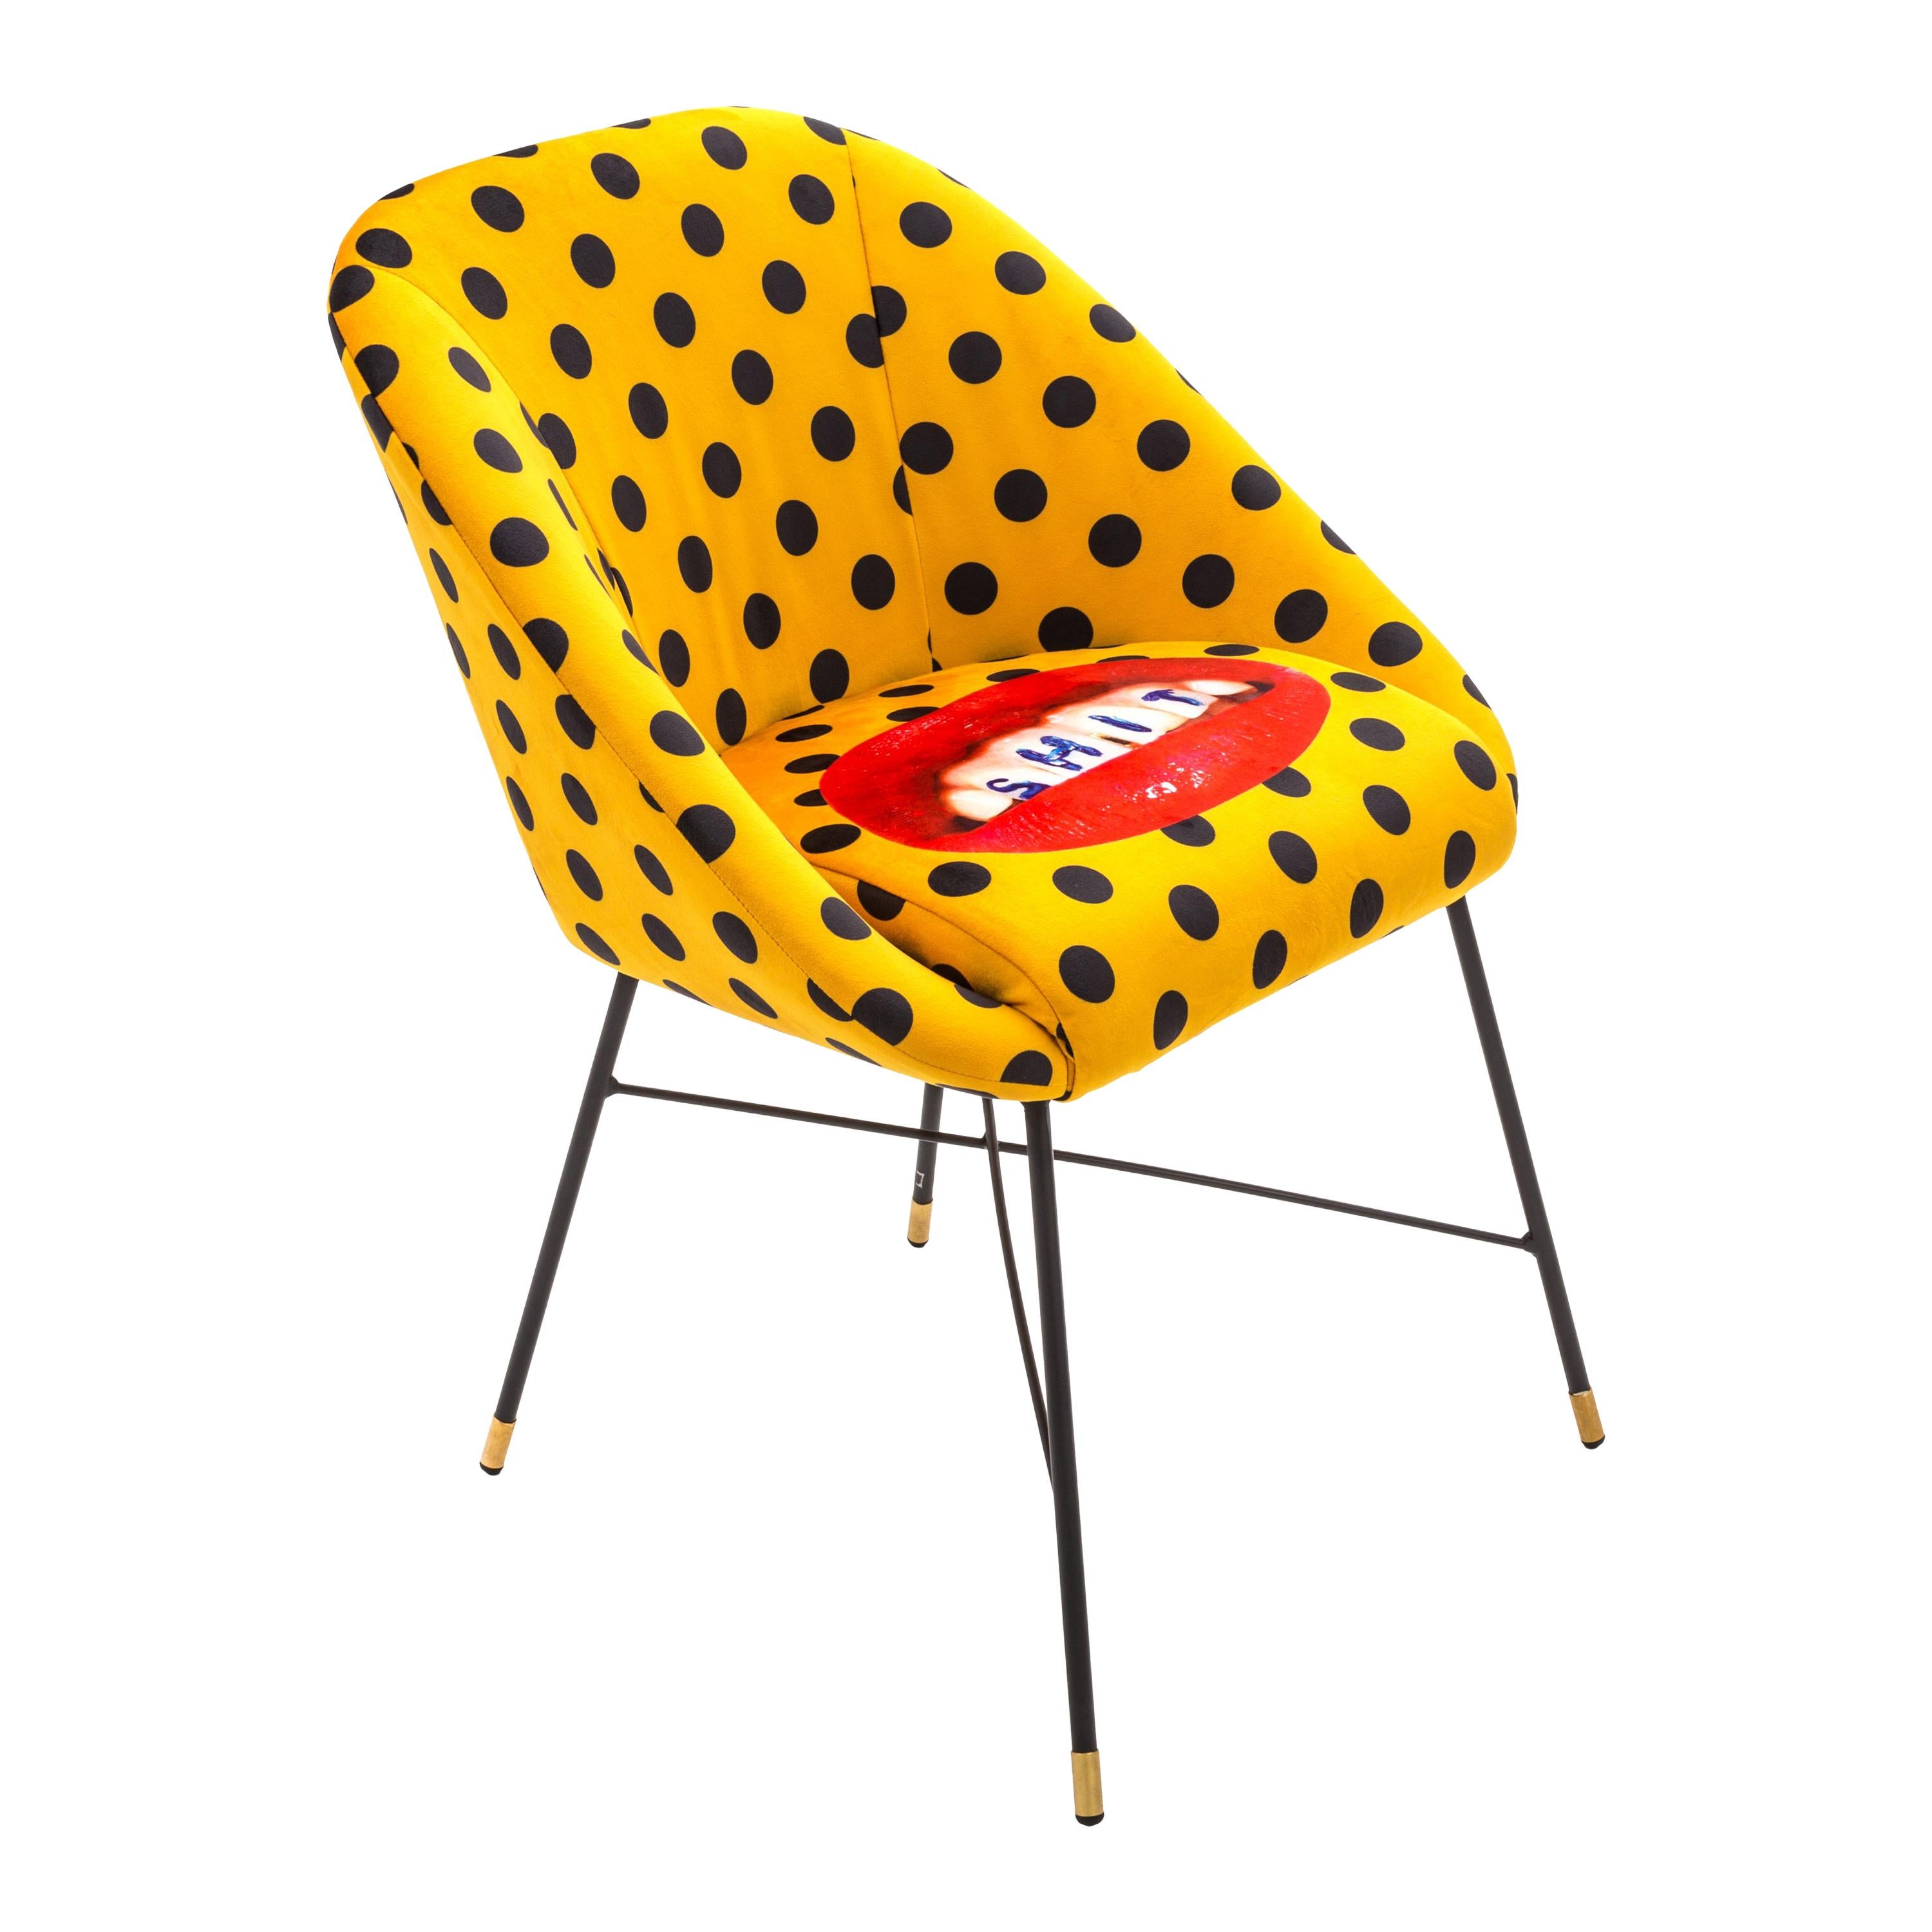 Seletti "Shit" Upholstered Occasional Chair by Toiletpaper For Sale